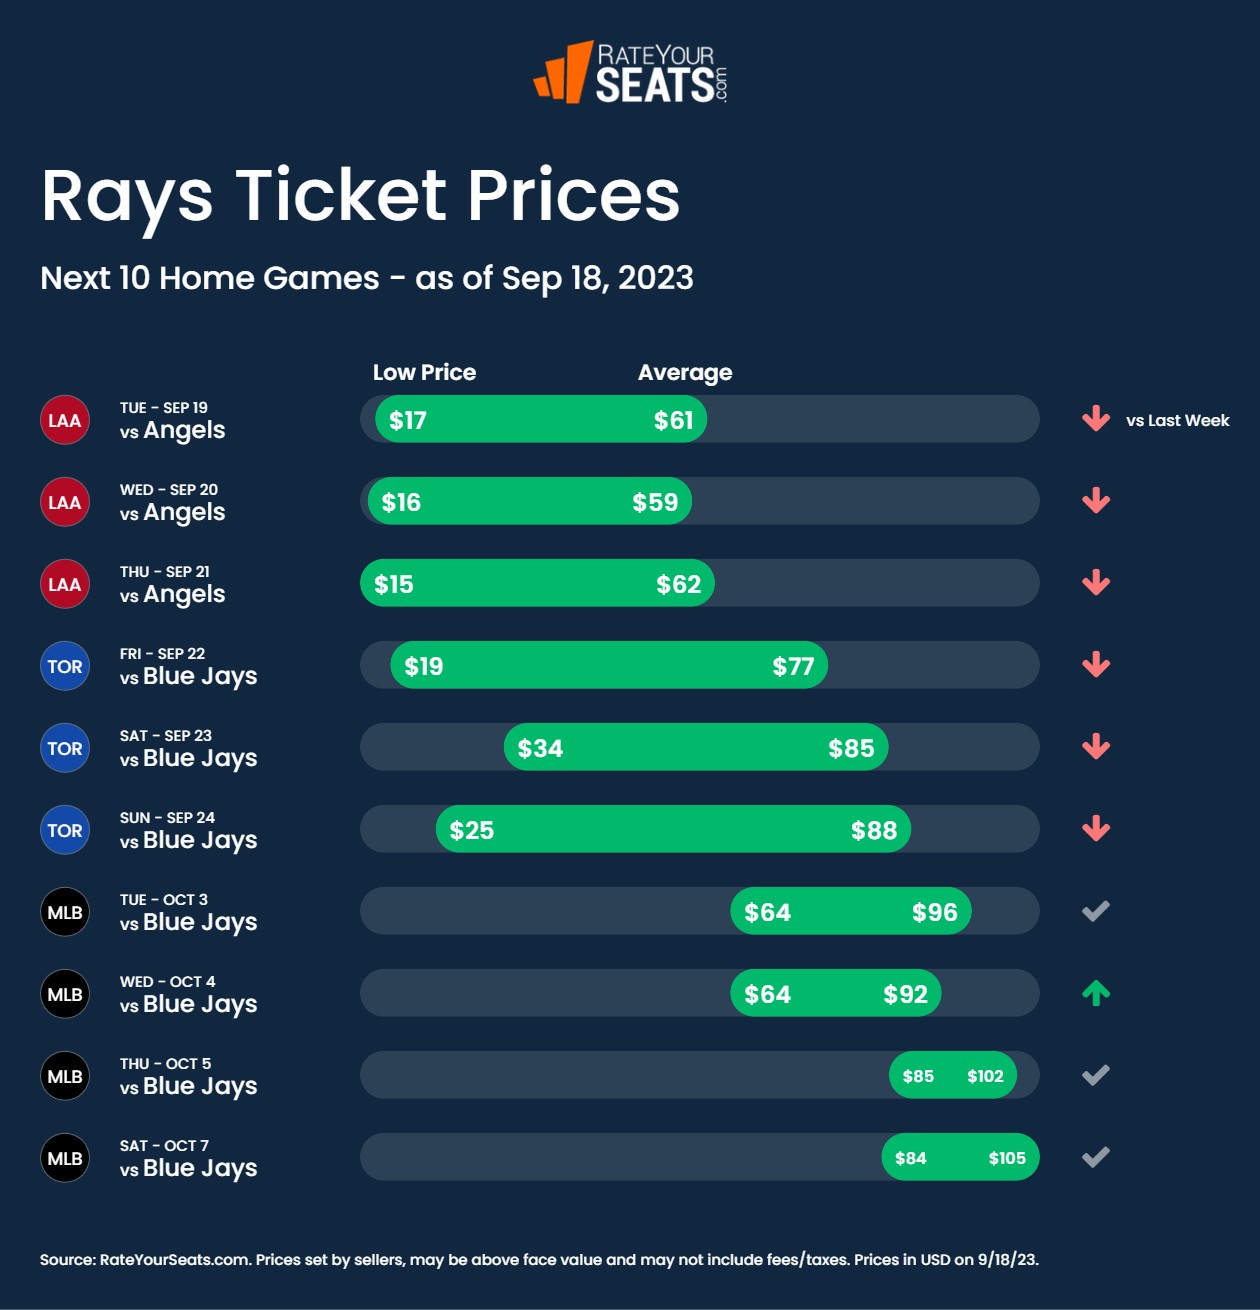 Rays tickets pricing week of September 18 2023